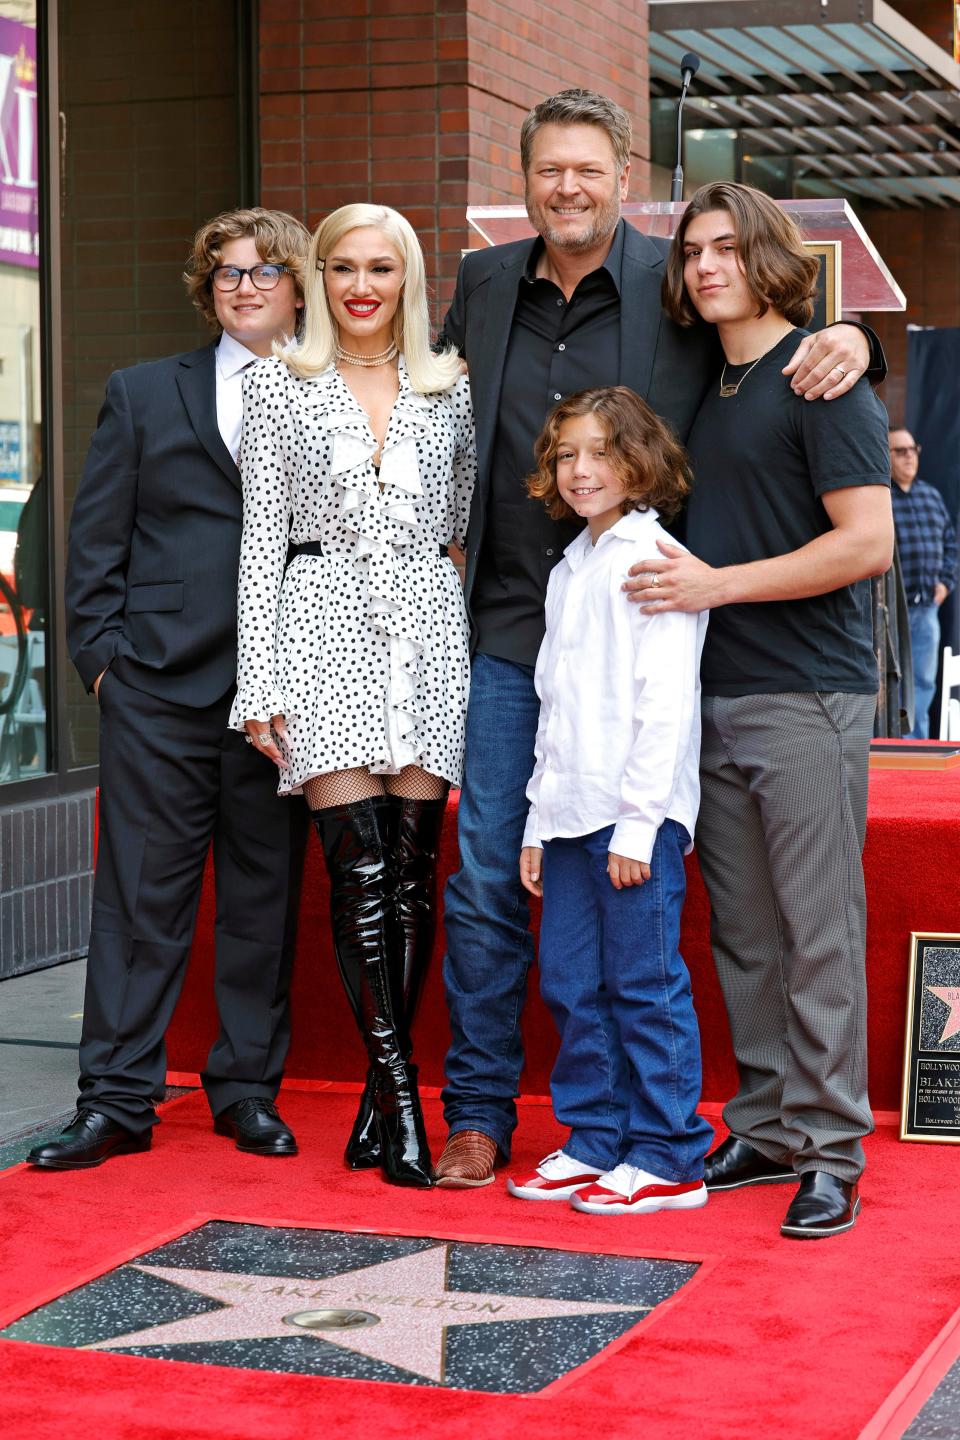 Kingston Rossdale (right) had his debut performance at stepdad Blake Shelton's bar in Oklahoma.